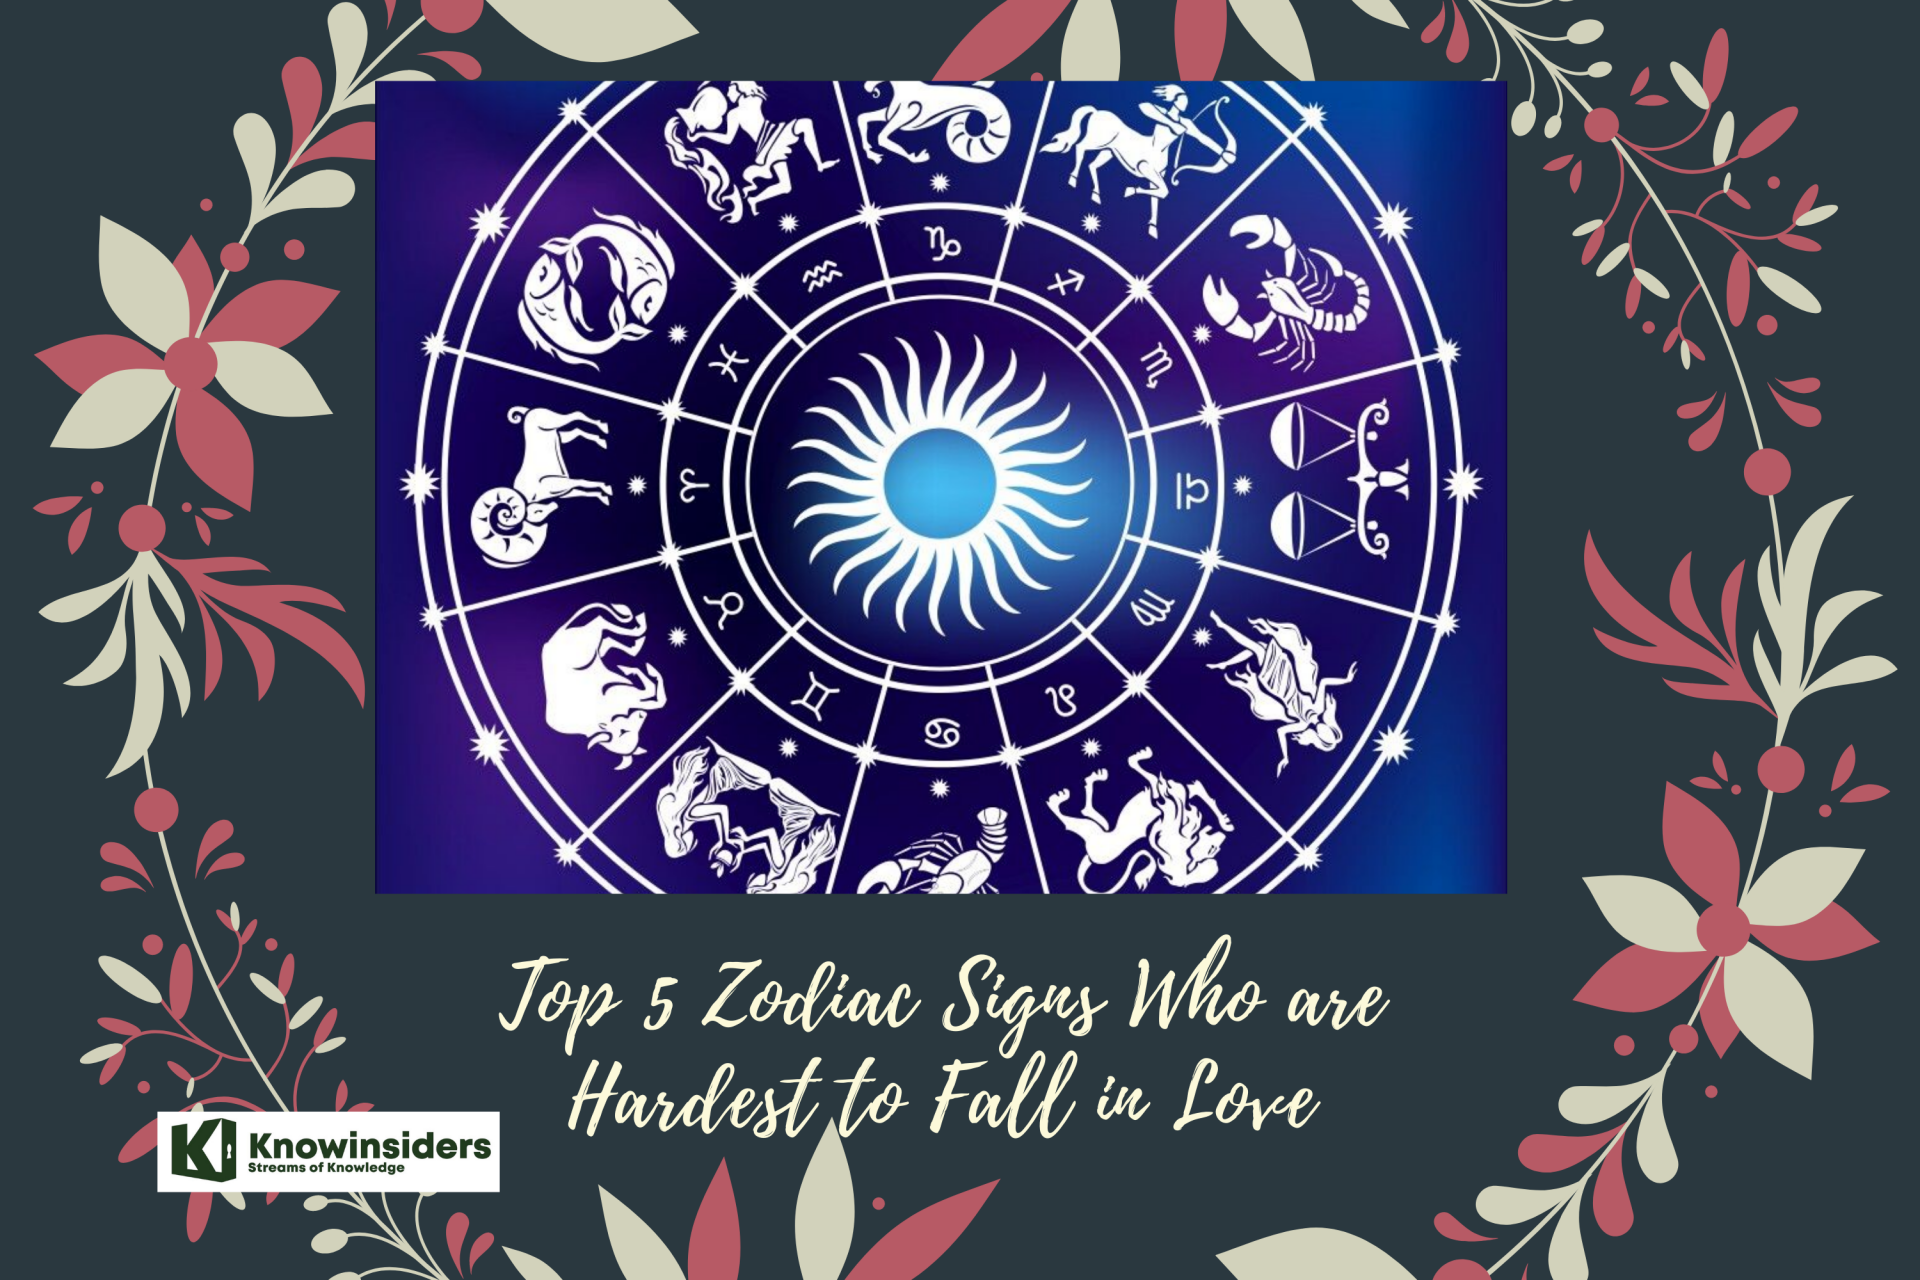 These 5 Zodiac Signs Are Hardest to Fall in Love - Astrological Prediction